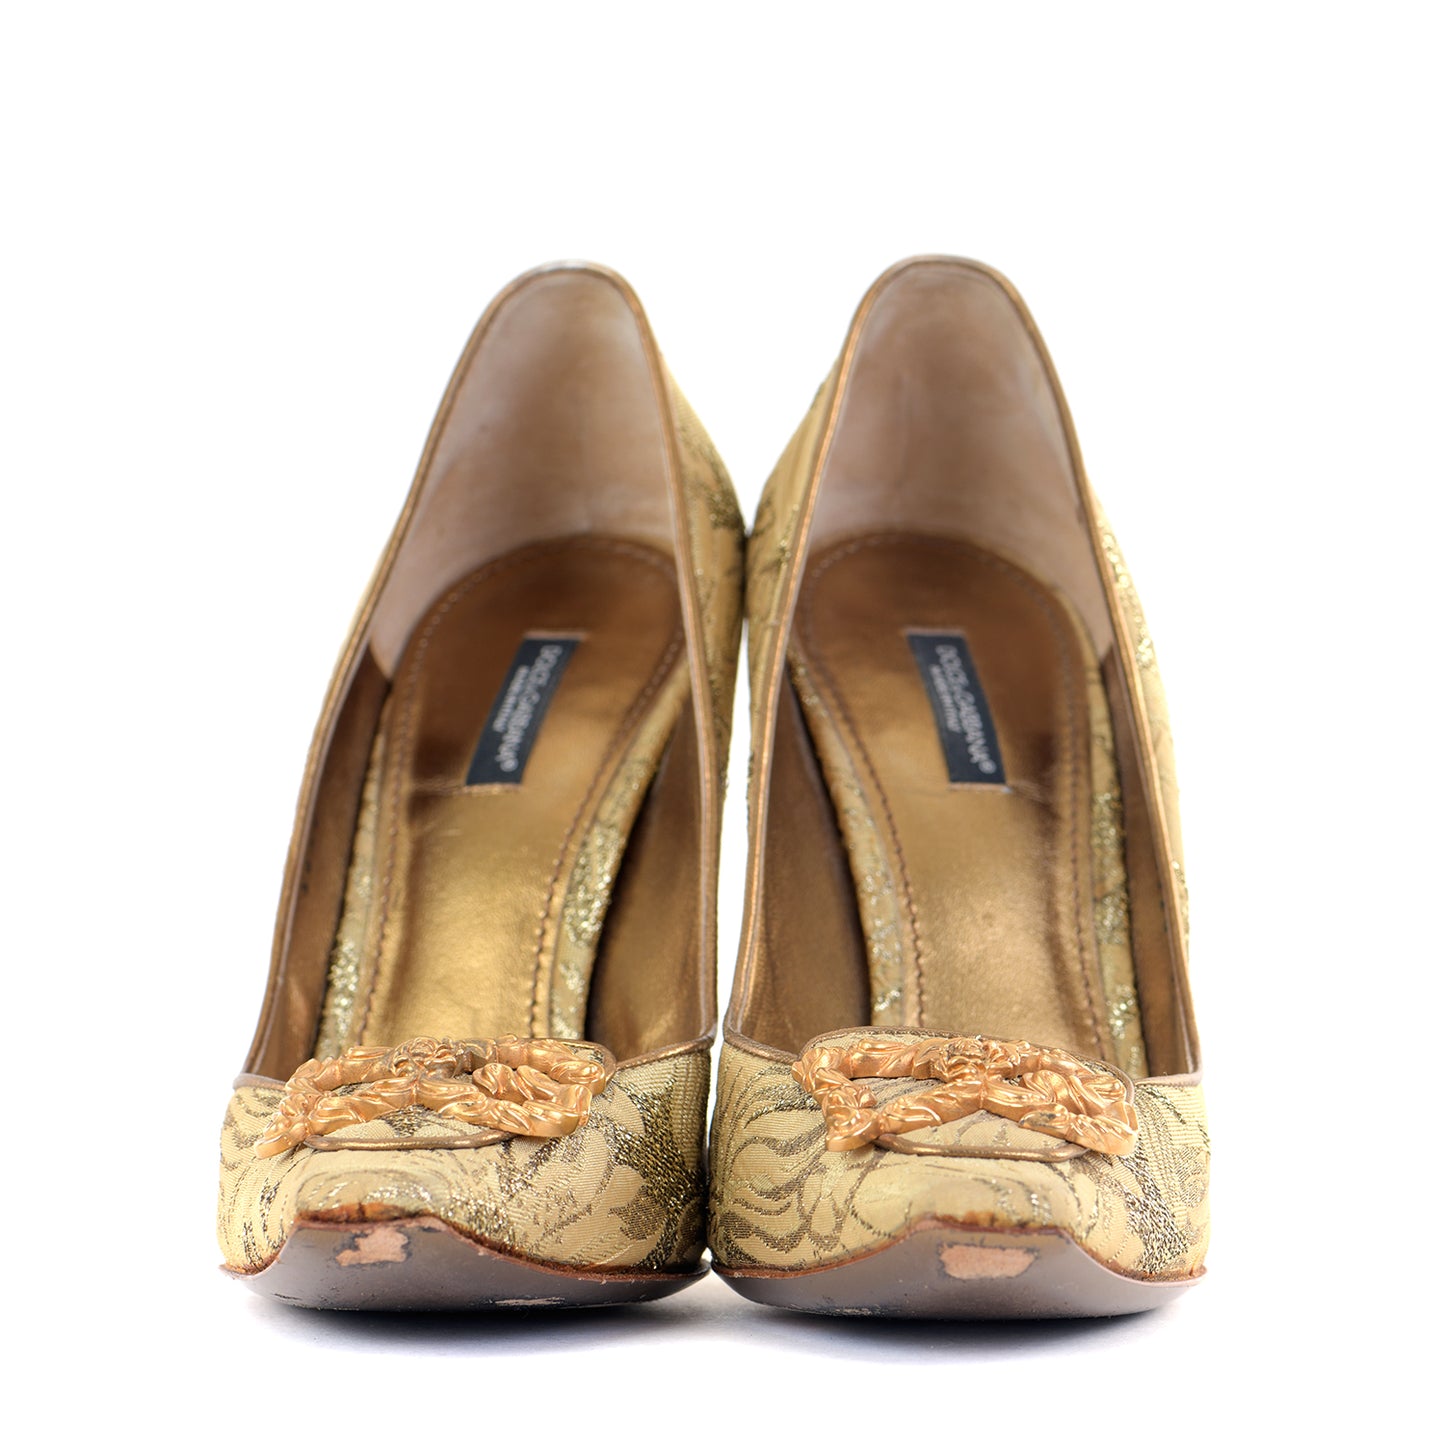 Brocade Pointed Court Shoes